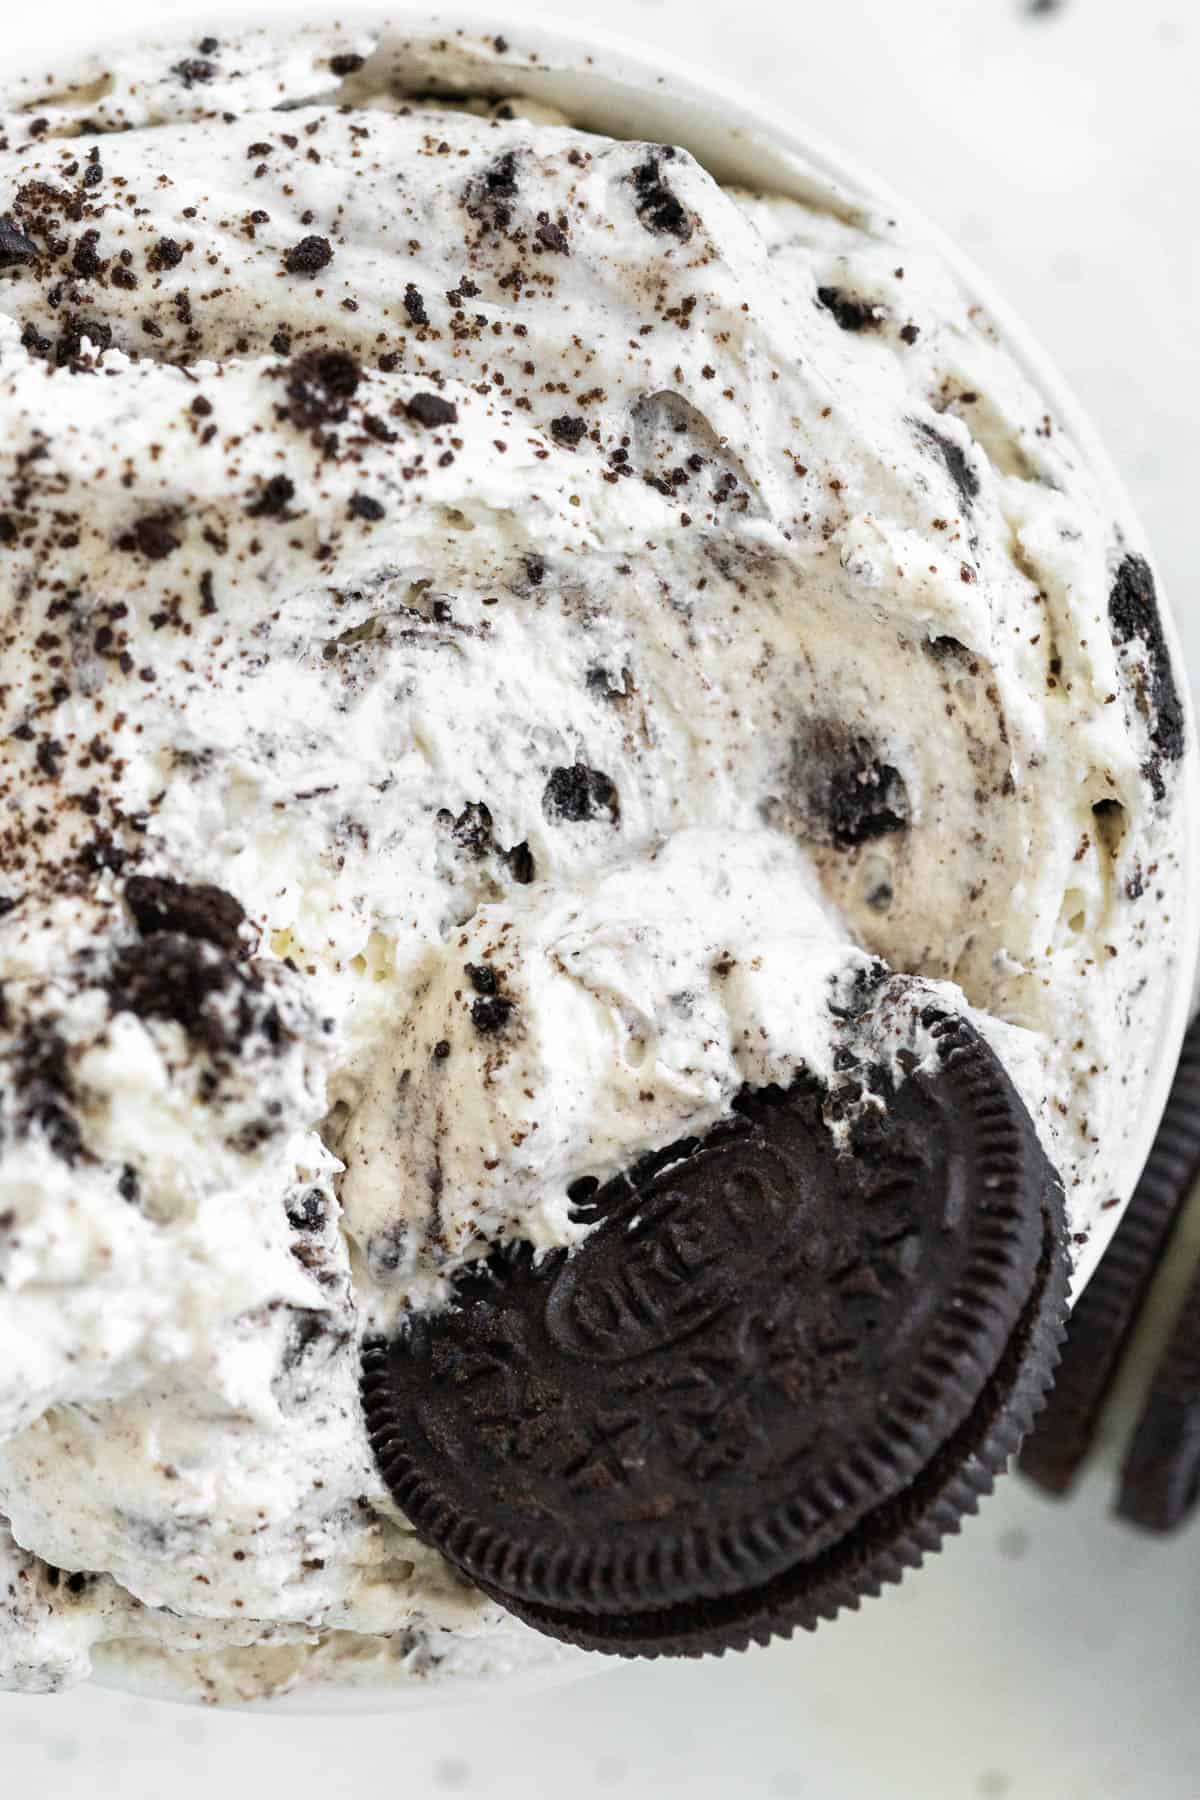 Oreo Dip with a whole Oreo cookie dipped in it